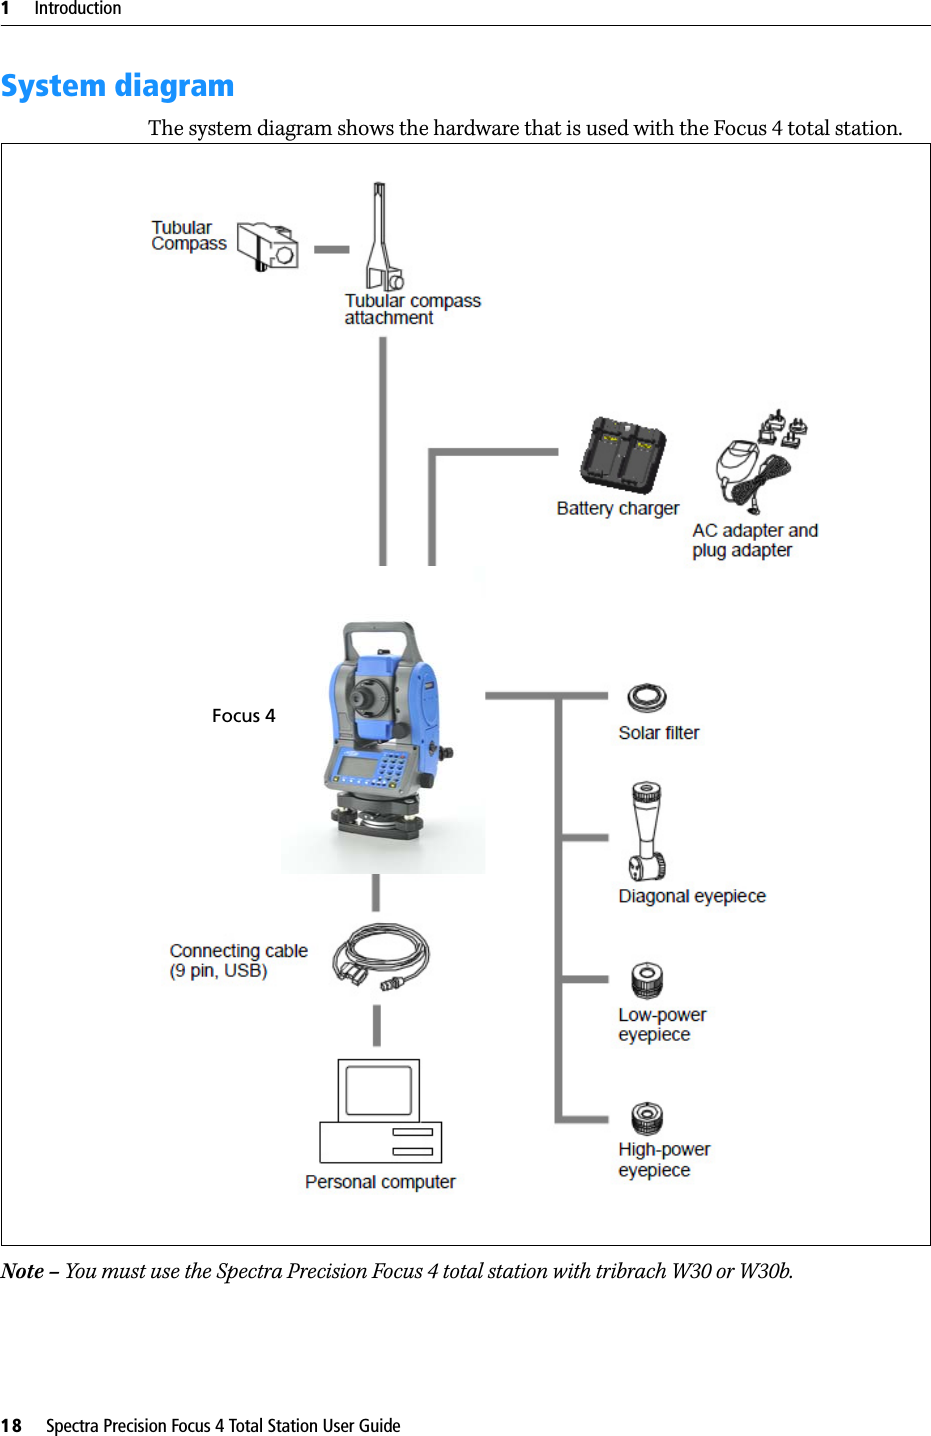 1     Introduction18     Spectra Precision Focus 4 Total Station User GuideSystem diagramThe system diagram shows the hardware that is used with the Focus 4 total station.Note – You must use the Spectra Precision Focus 4 total station with tribrach W30 or W30b.Focus 4